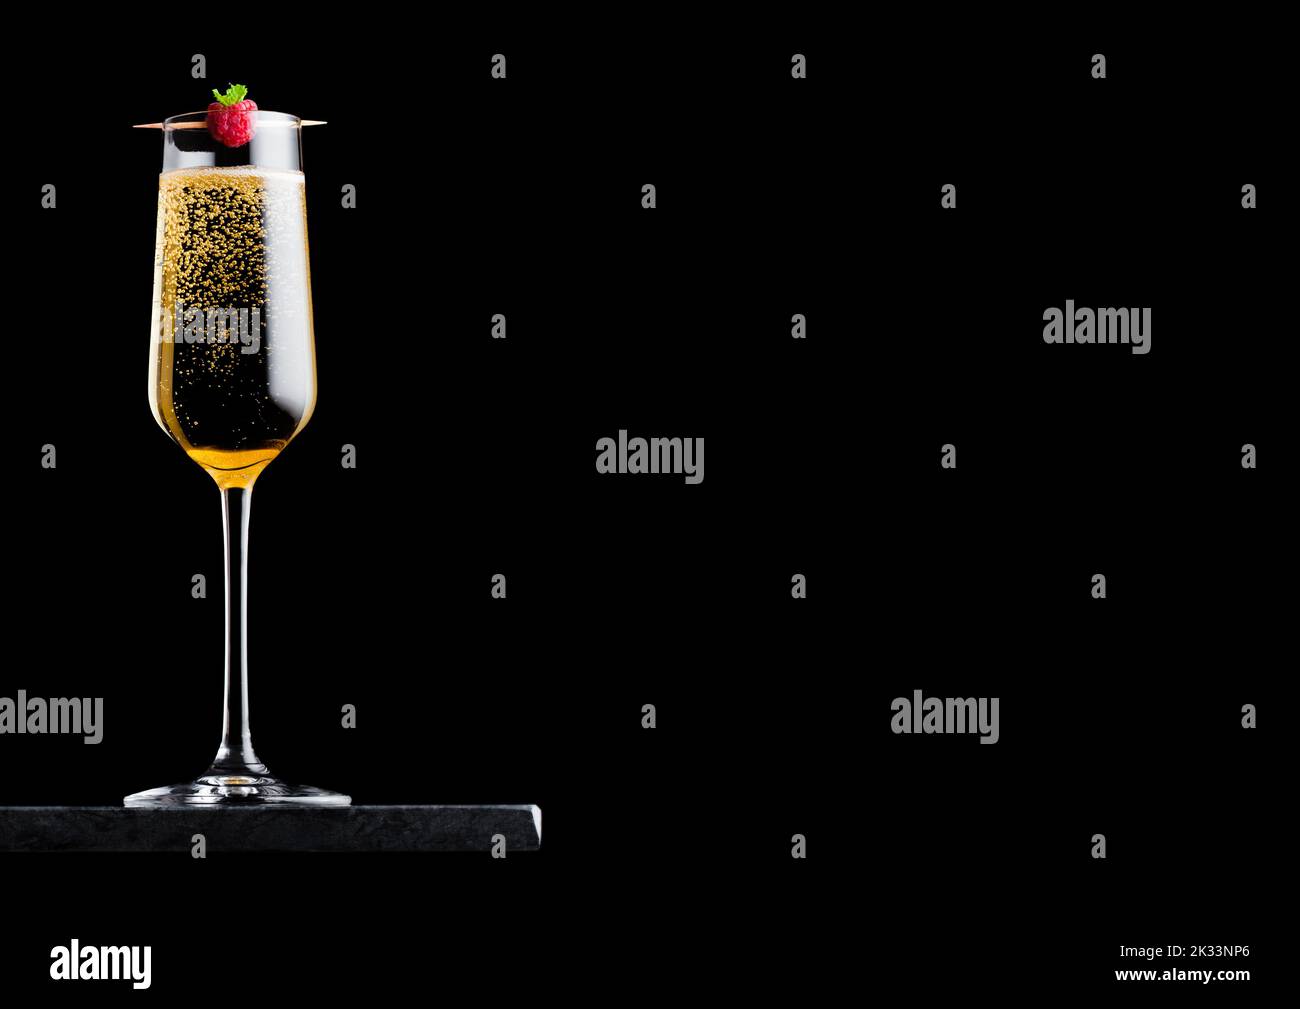 Elegant glass of yellow champagne with rasspbery on stick on black marble board on black background. Stock Photo